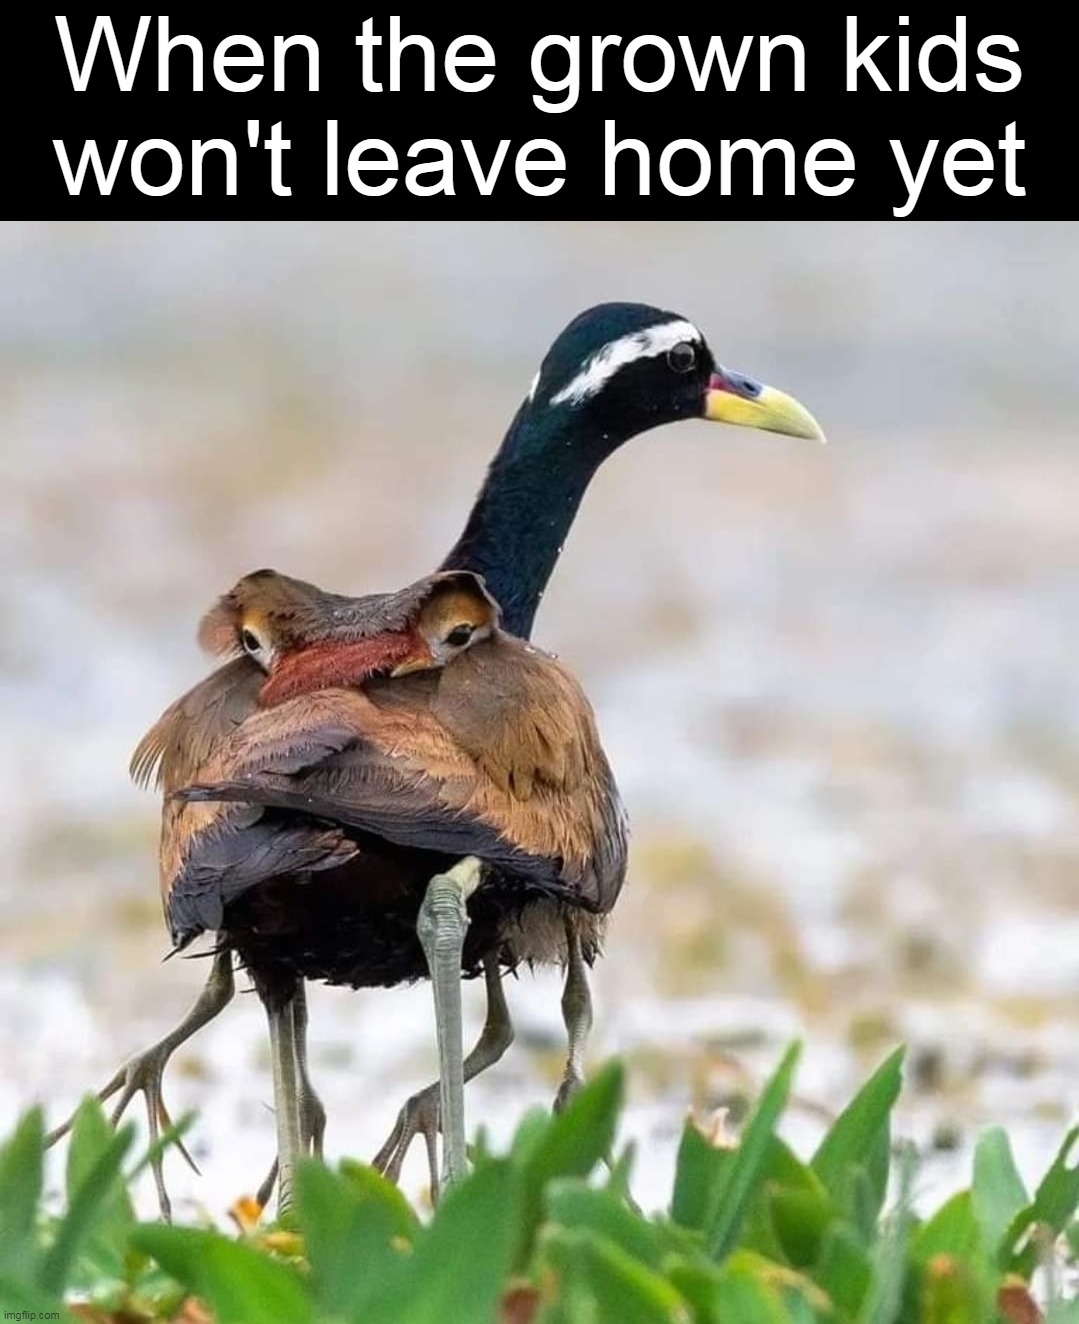 When the grown kids won't leave home yet | image tagged in meme,memes,humor | made w/ Imgflip meme maker